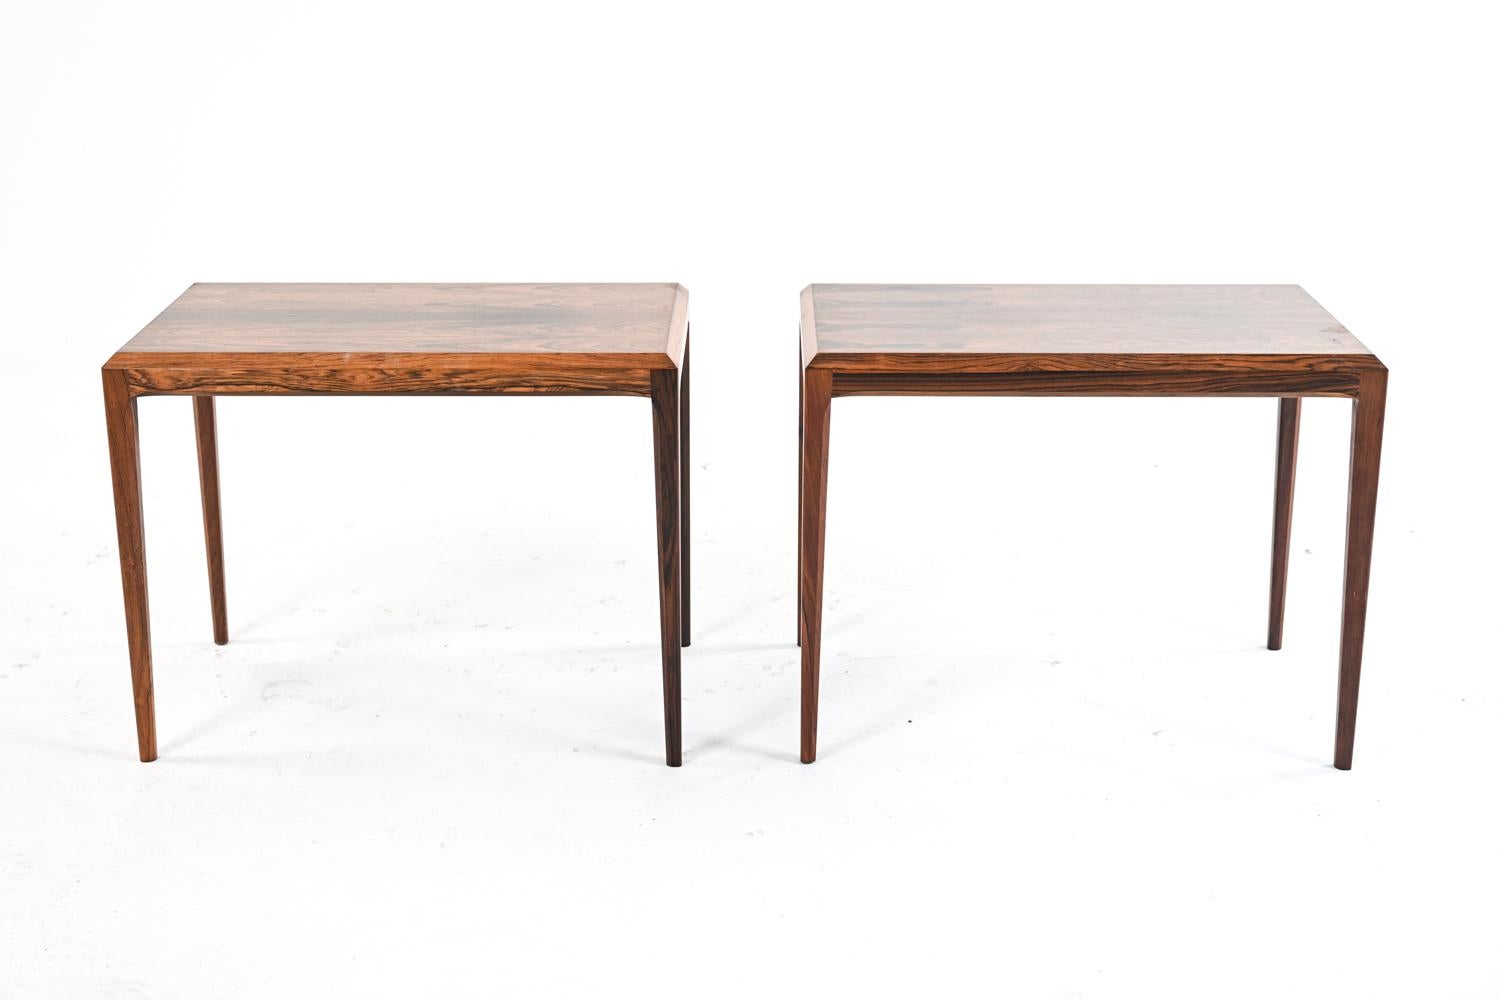 A lovely pair of mid-century nesting tables in rosewood, with beveled edges and classic tapered legs. Designed by Johannes Andersen for CFC Silkeborg and produced in the 1960's; each table marked with a Silkeborg foil label underneath. Tables are